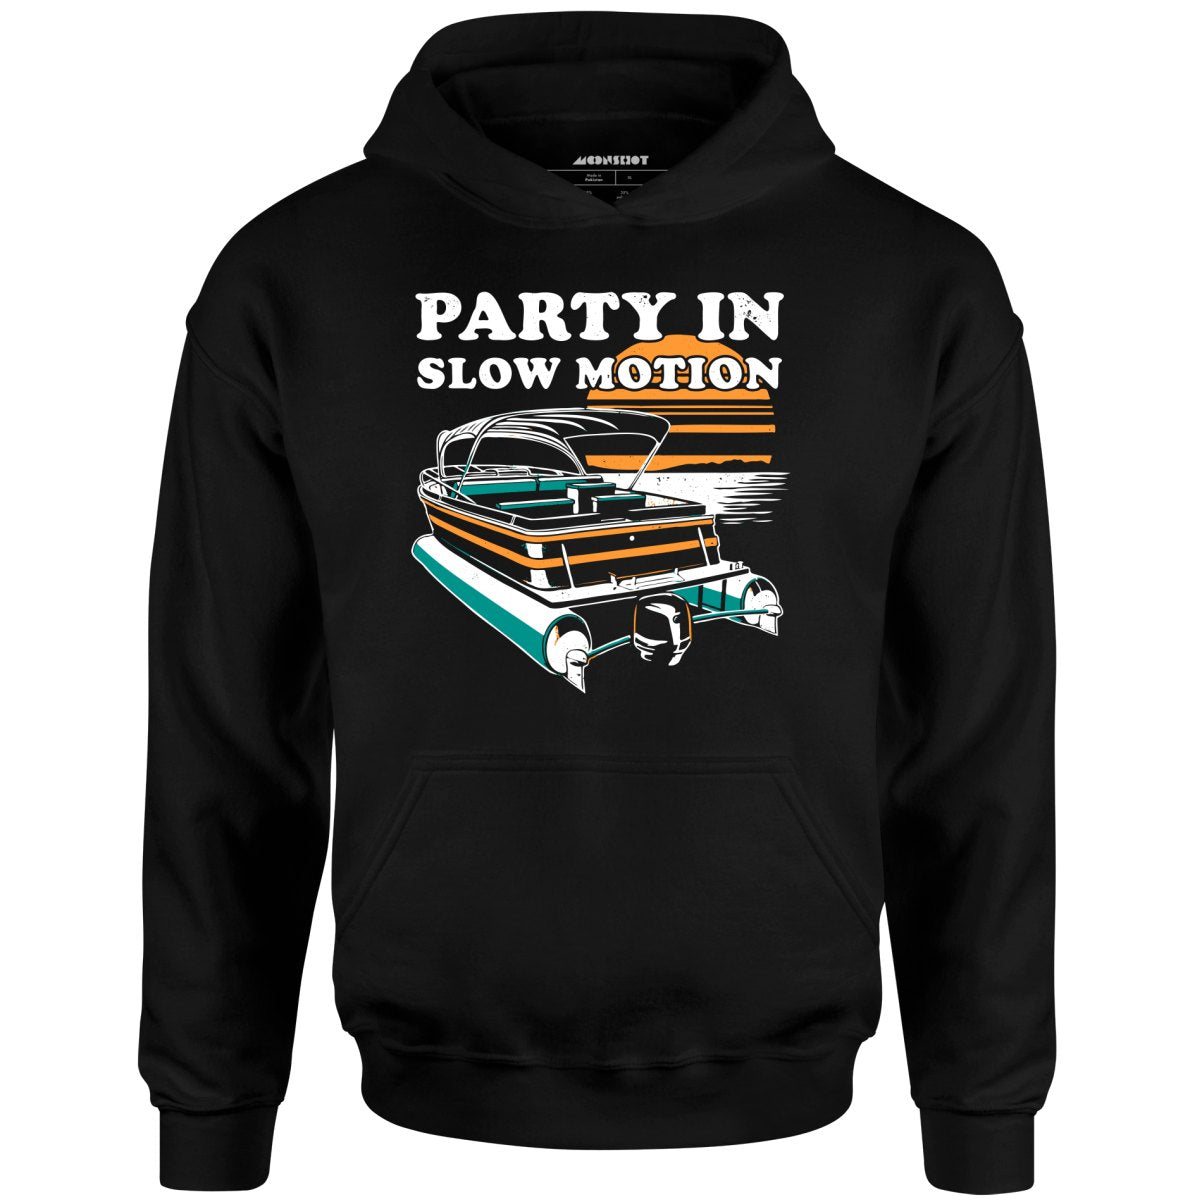 Party in Slow Motion - Unisex Hoodie